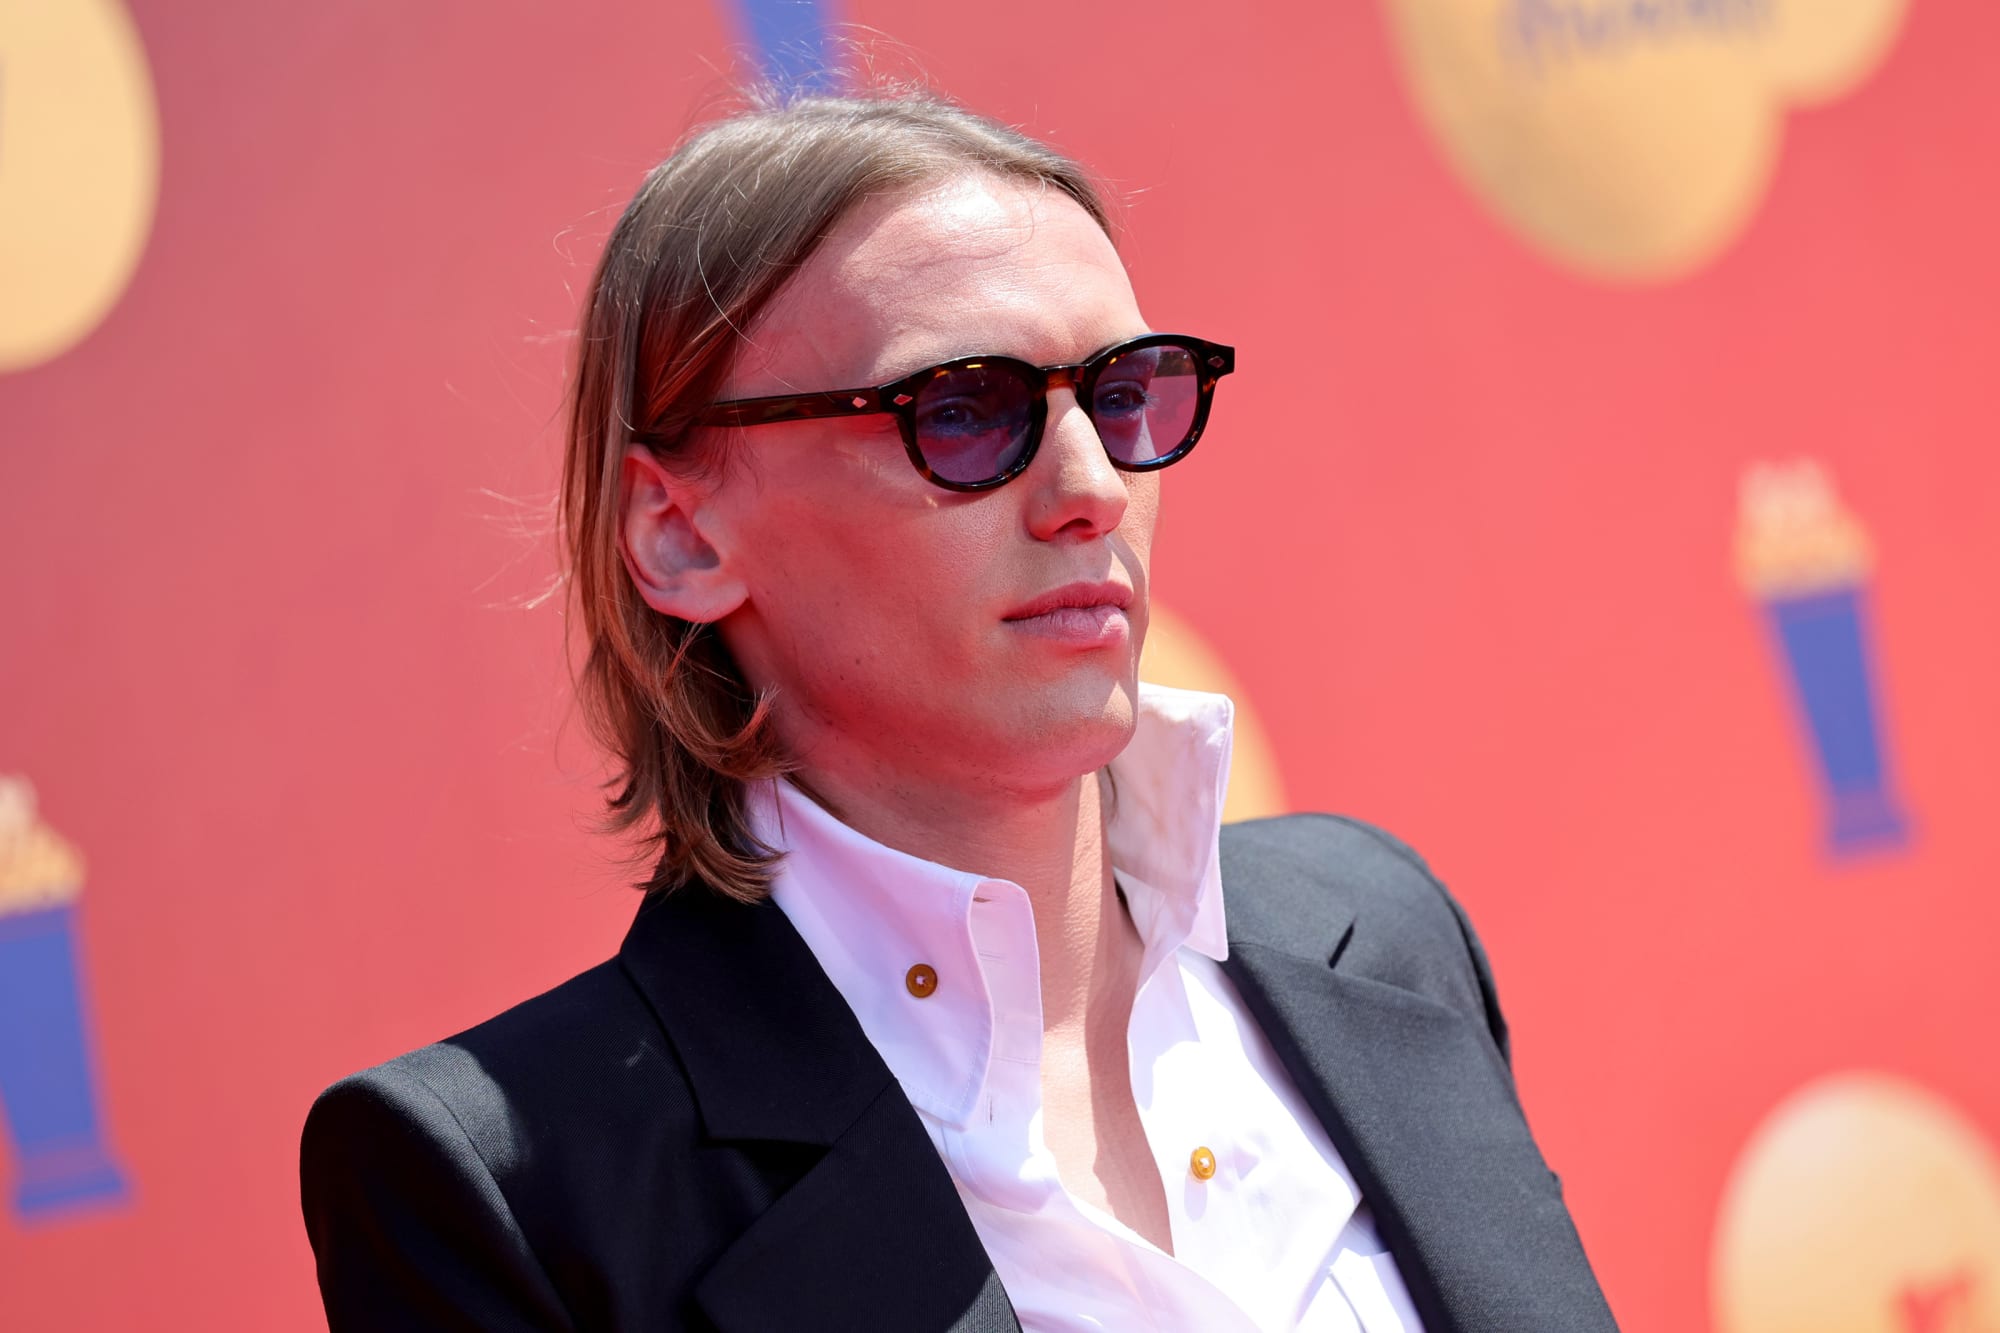 Watch Stranger Things actor Jamie Campbell Bower read Lizzo lyrics as Vecna